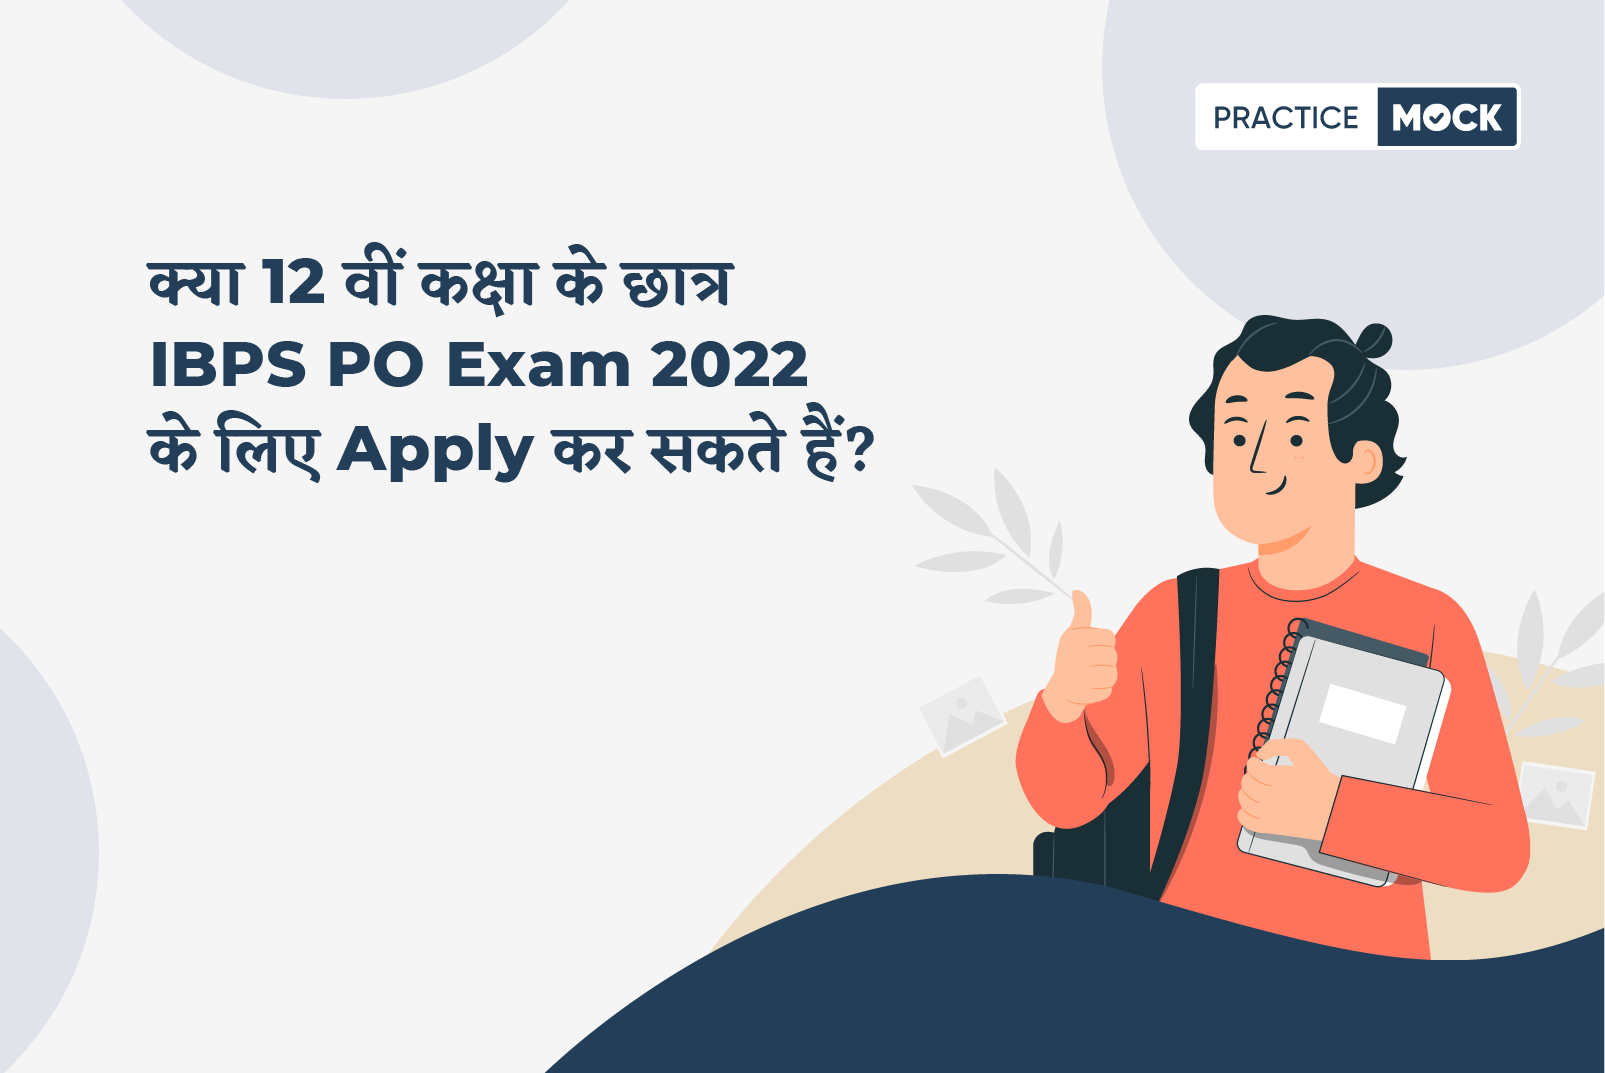 Can Final Year Students Apply for IBPS PO 2022 Exam?